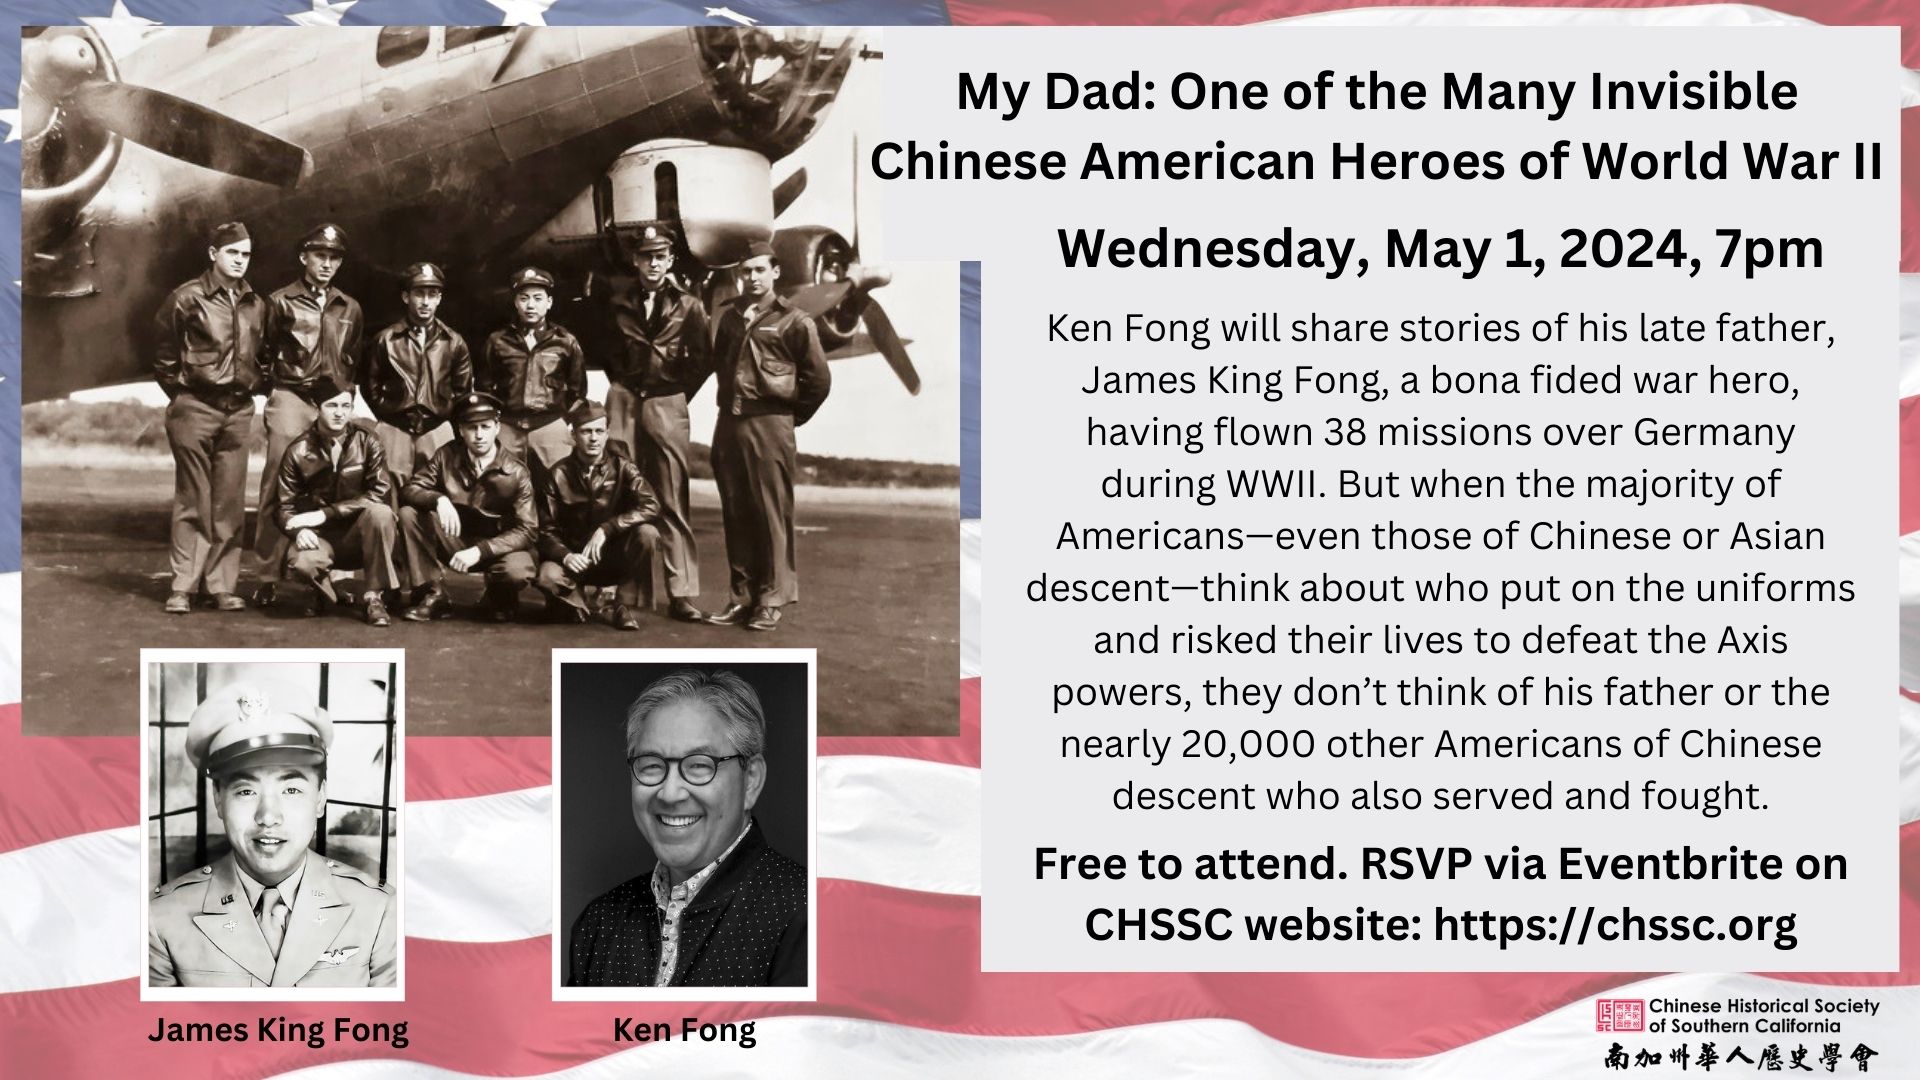 Ken Fong will share stories of his late father, James King Fong, a true war hero who flew 38 missions over Germany during WWII.